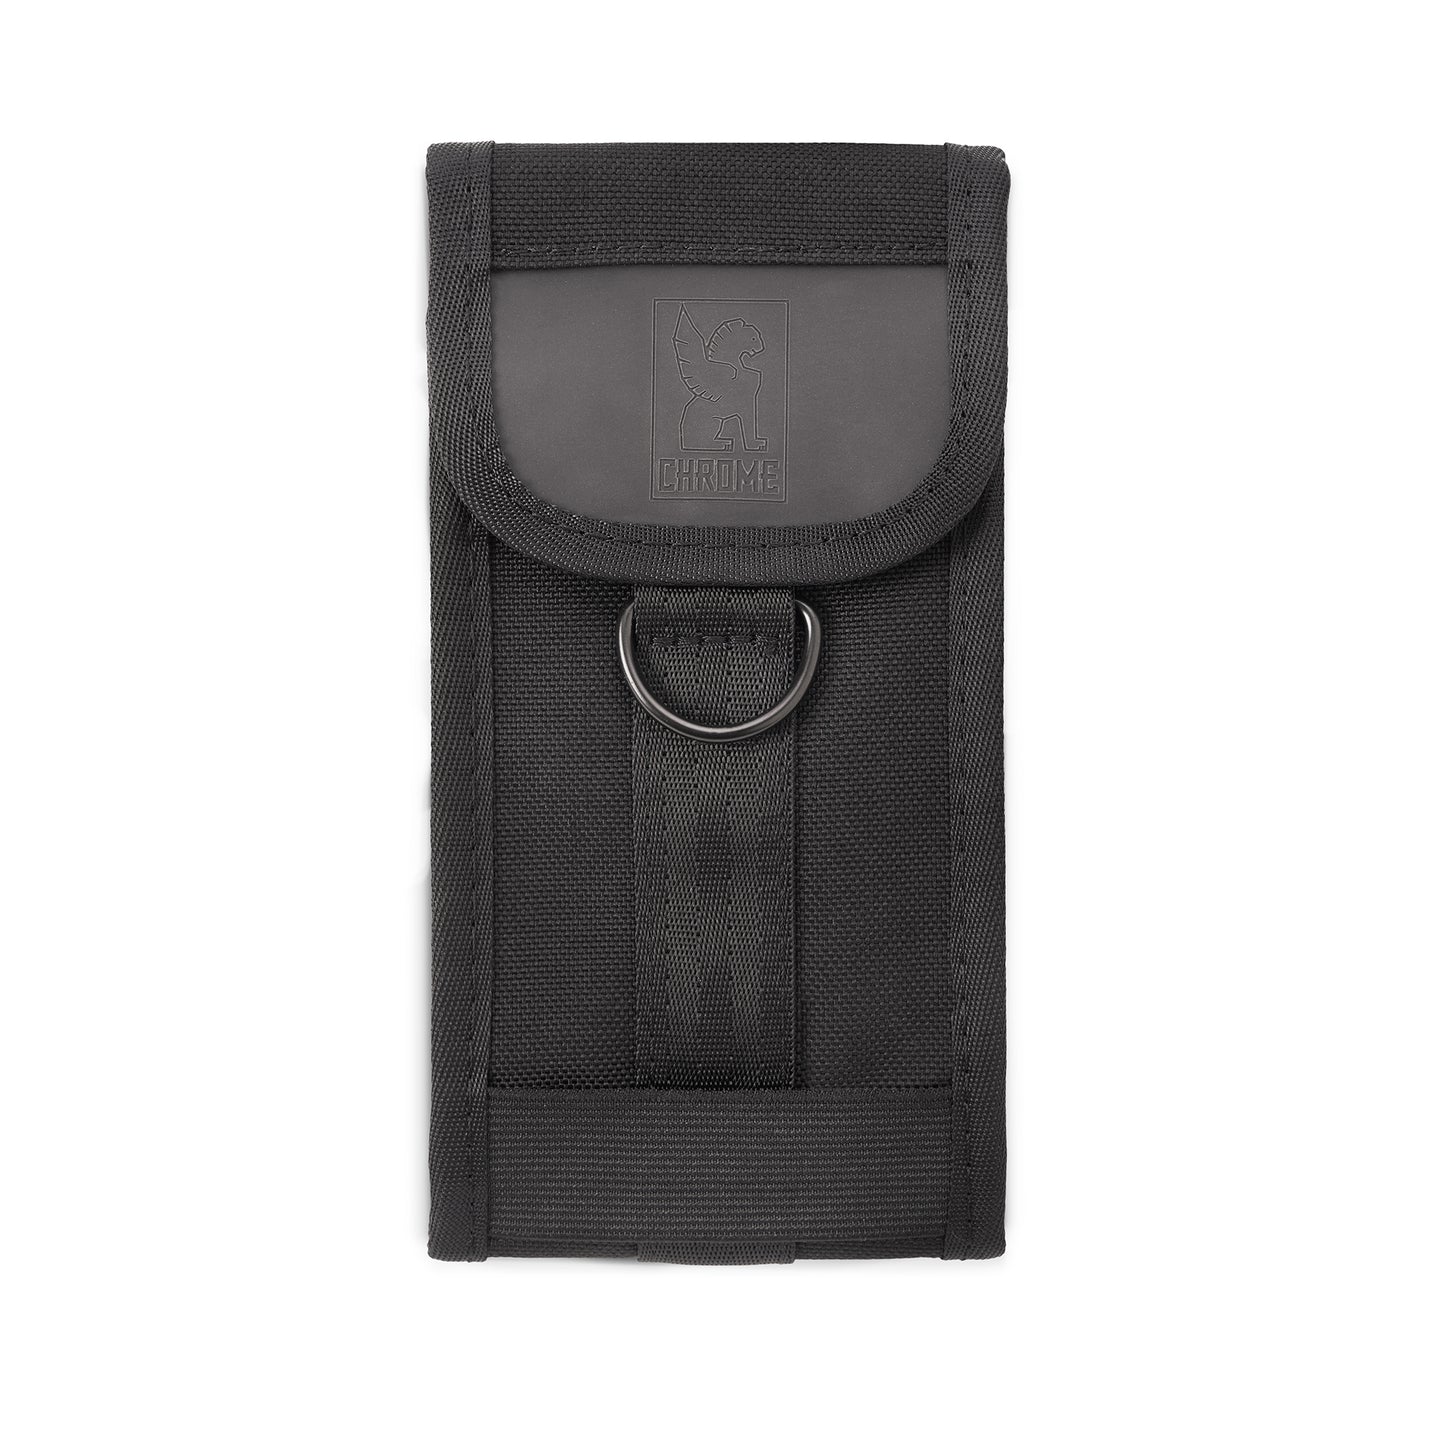 Chrome Industries Large Phone Pouch - Black